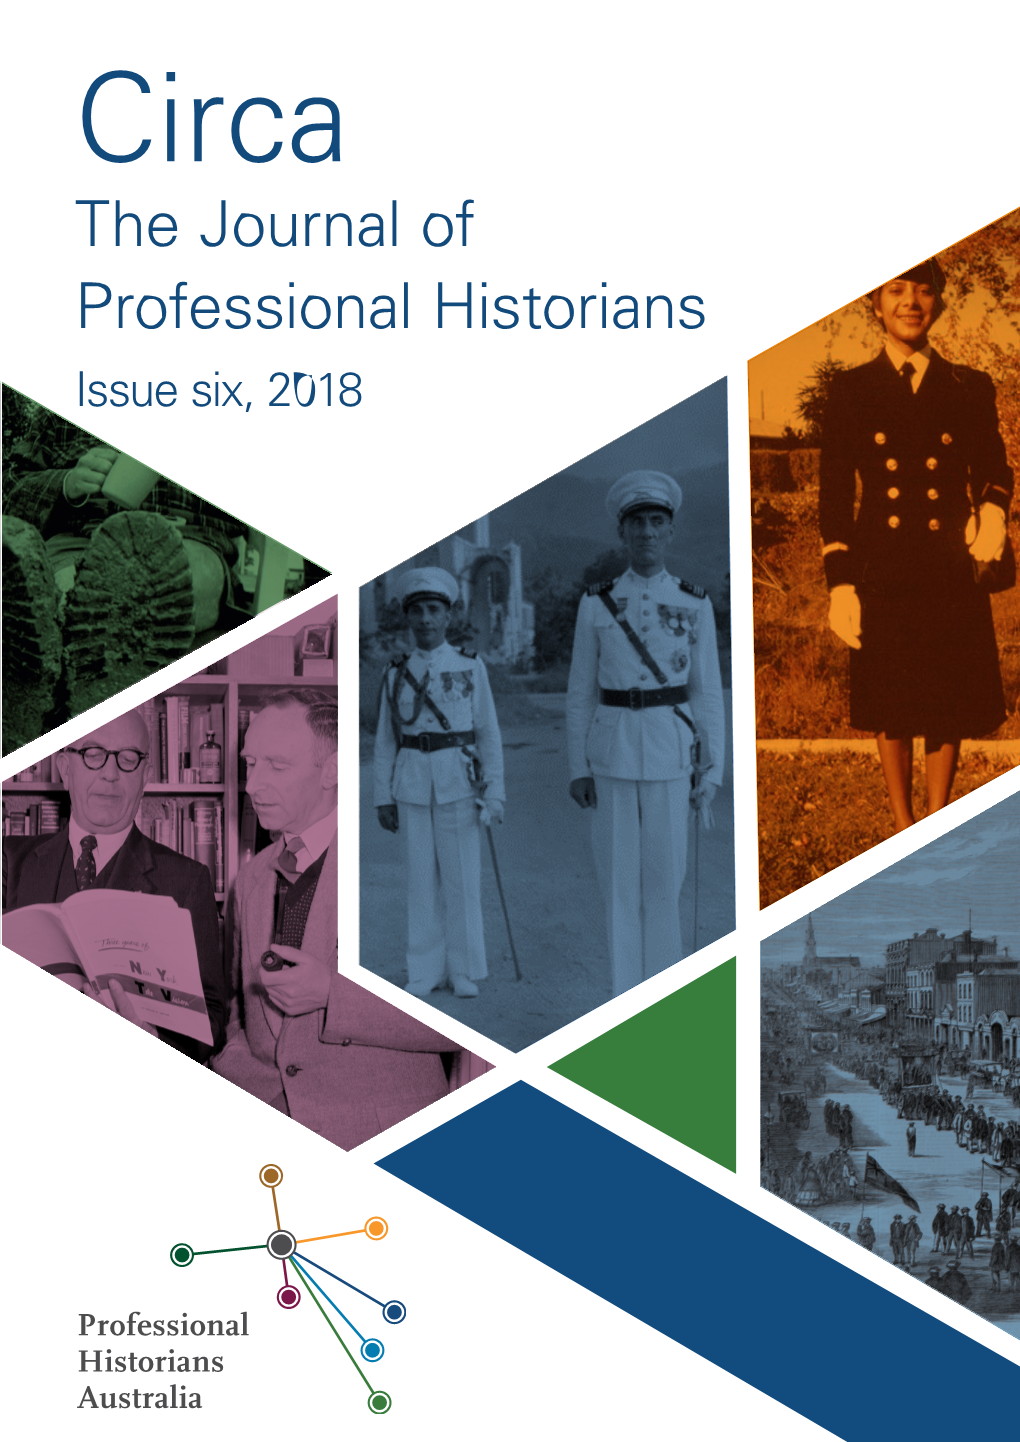 The Journal of Professional Historians